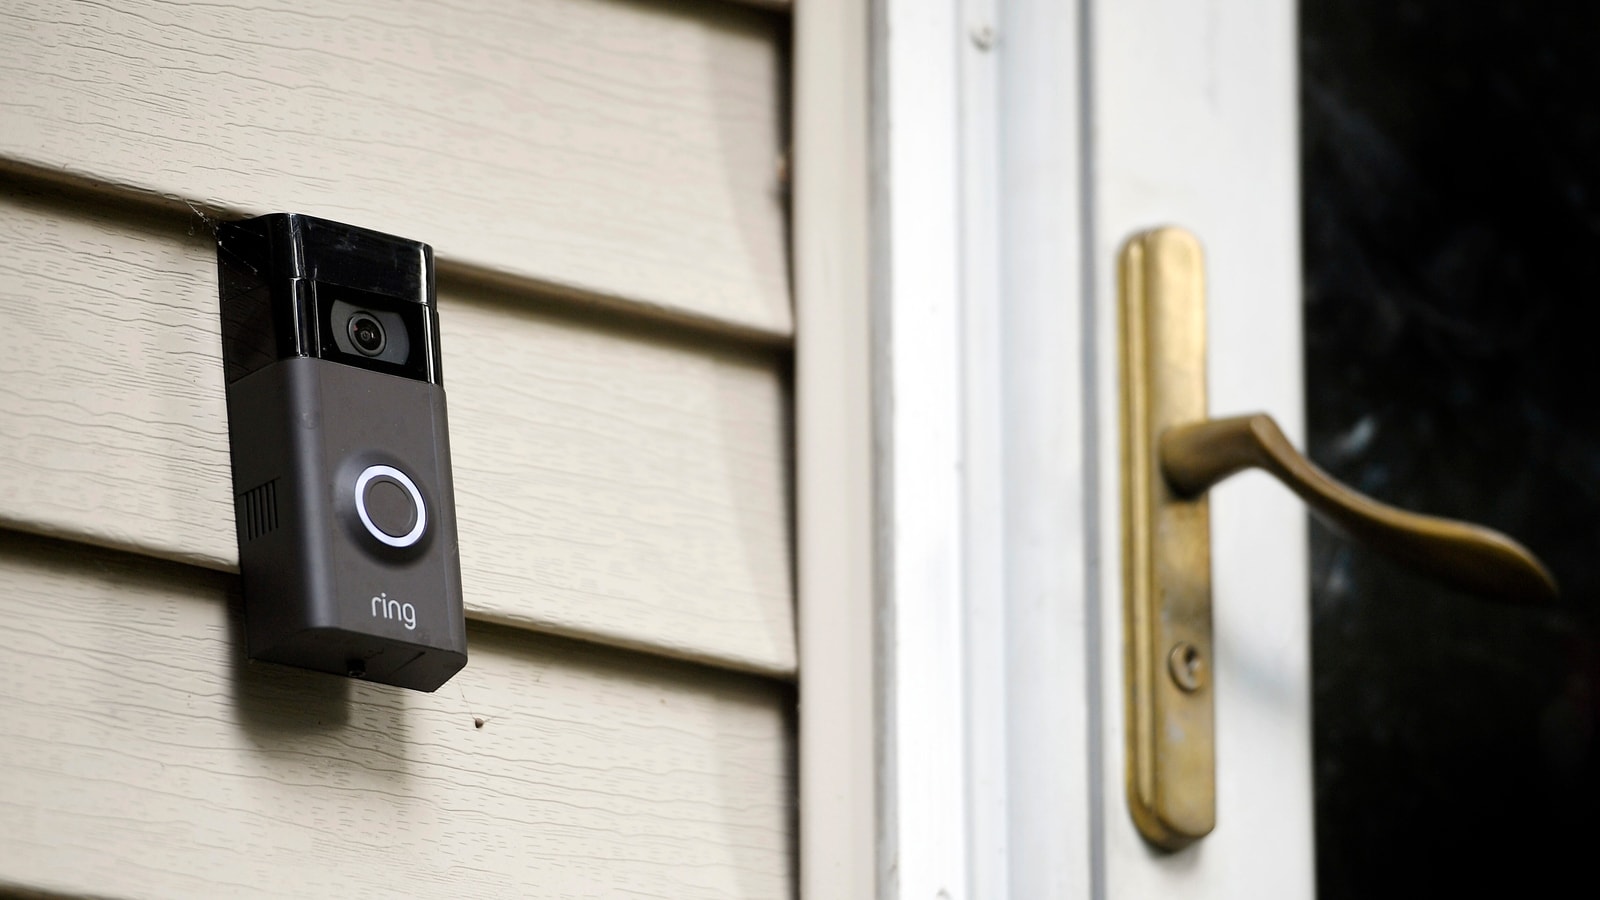 Amazon’s ring to stop letting police request doorbell video from users